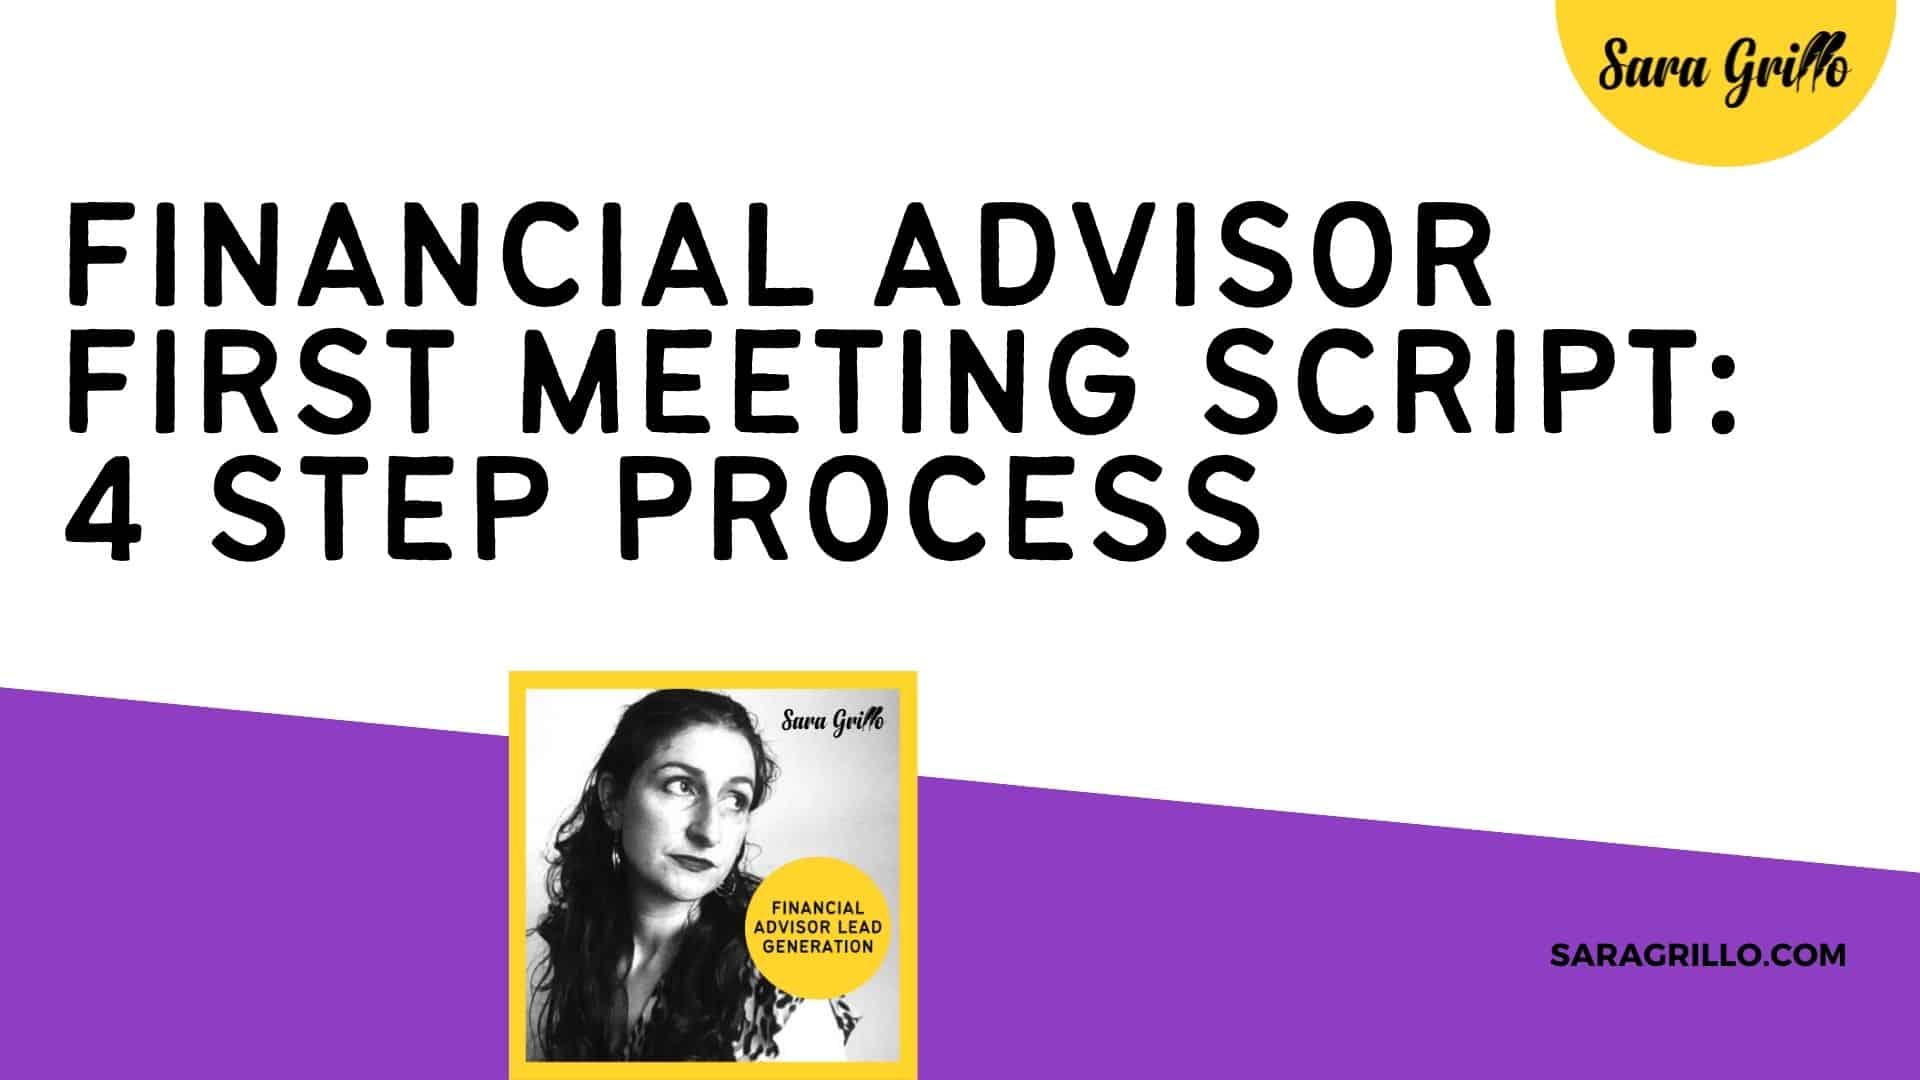 In this article I discuss the process for creating a financial advisor first meeting script you can follow.